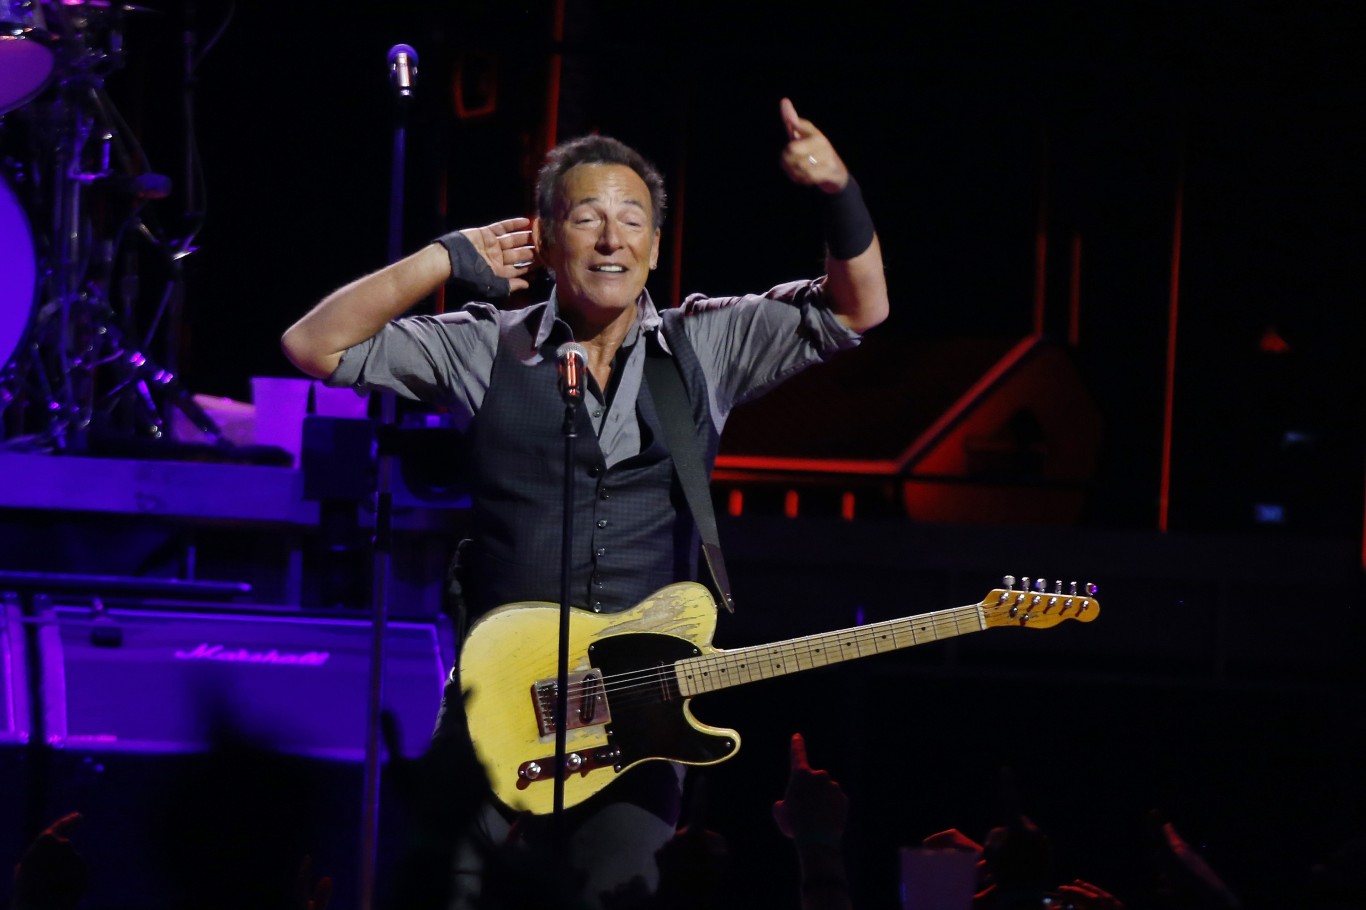 Bruce Springsteen: I hope my Harry Potter song sees the light of day